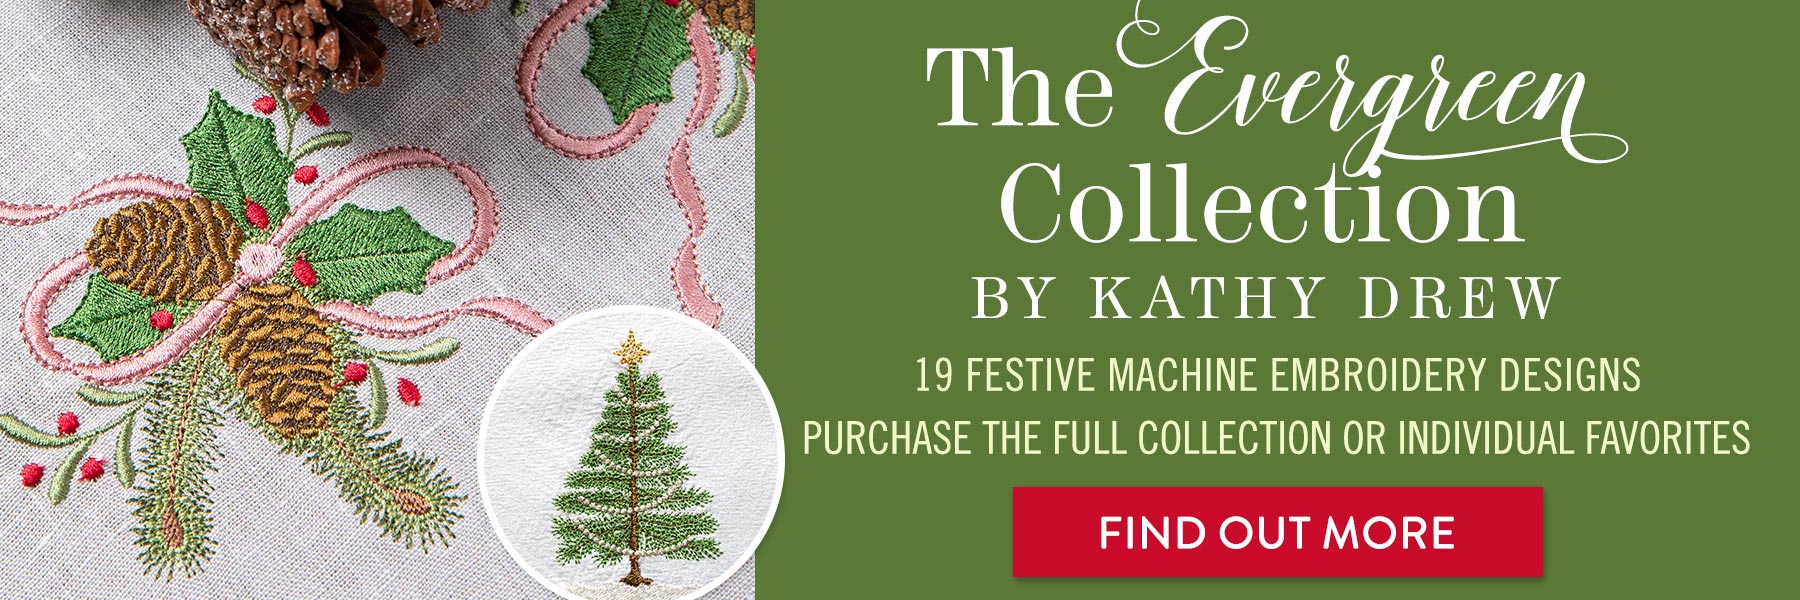 evergreen collection by kathy drew